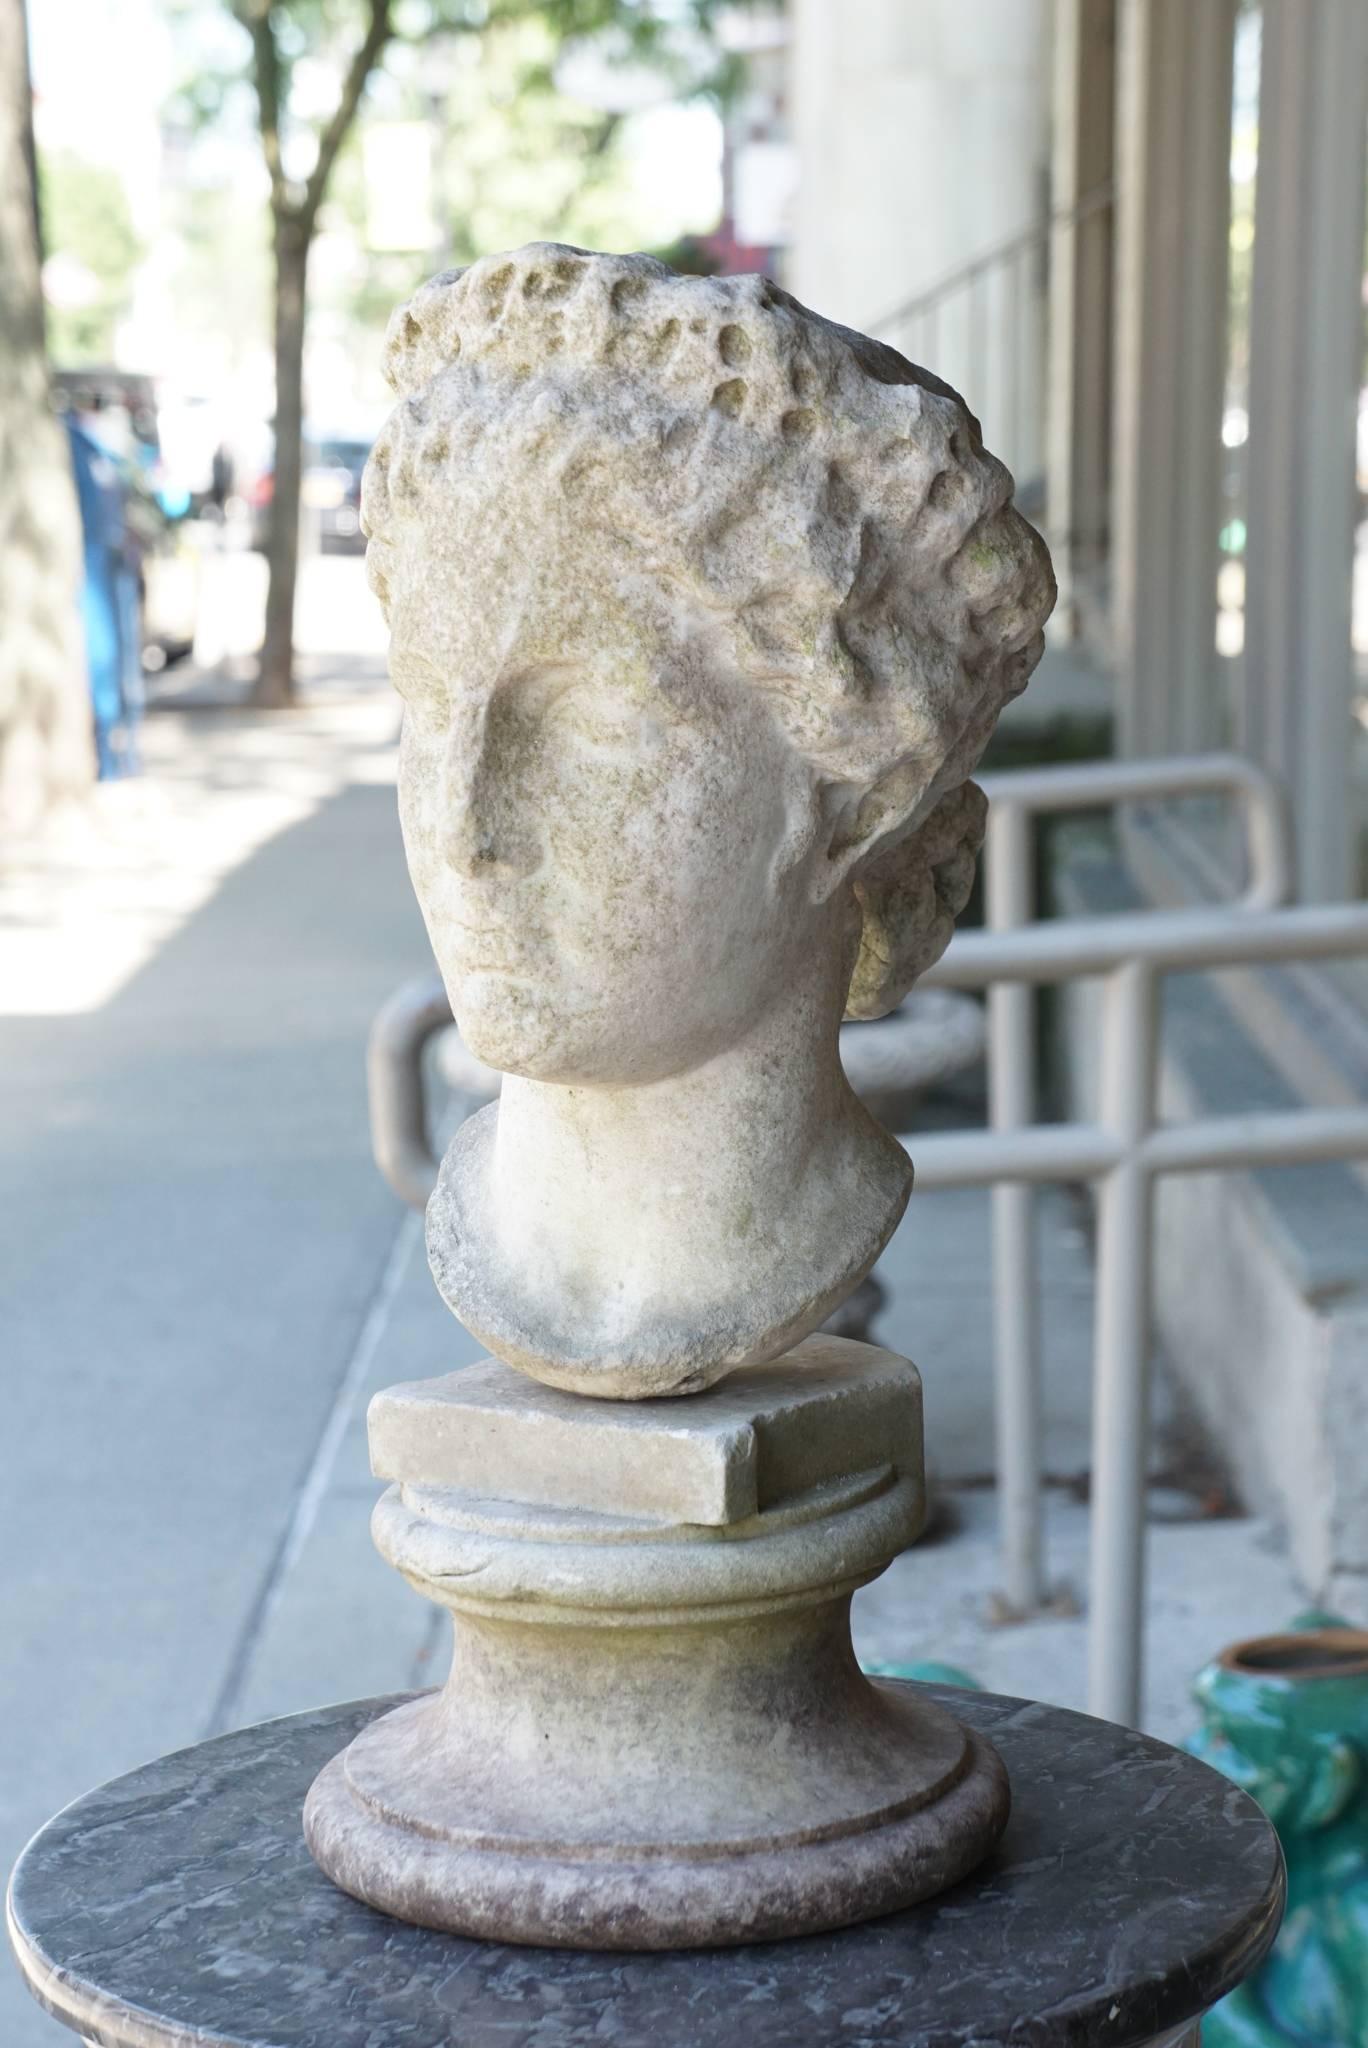 This bust conceived as an exterior garden ornament is from the antique and was carved, circa 1820-1850. While not exactly like the head of the Venus De Milo the work clearly is an interpretation and shares with other classical statues aspects of the